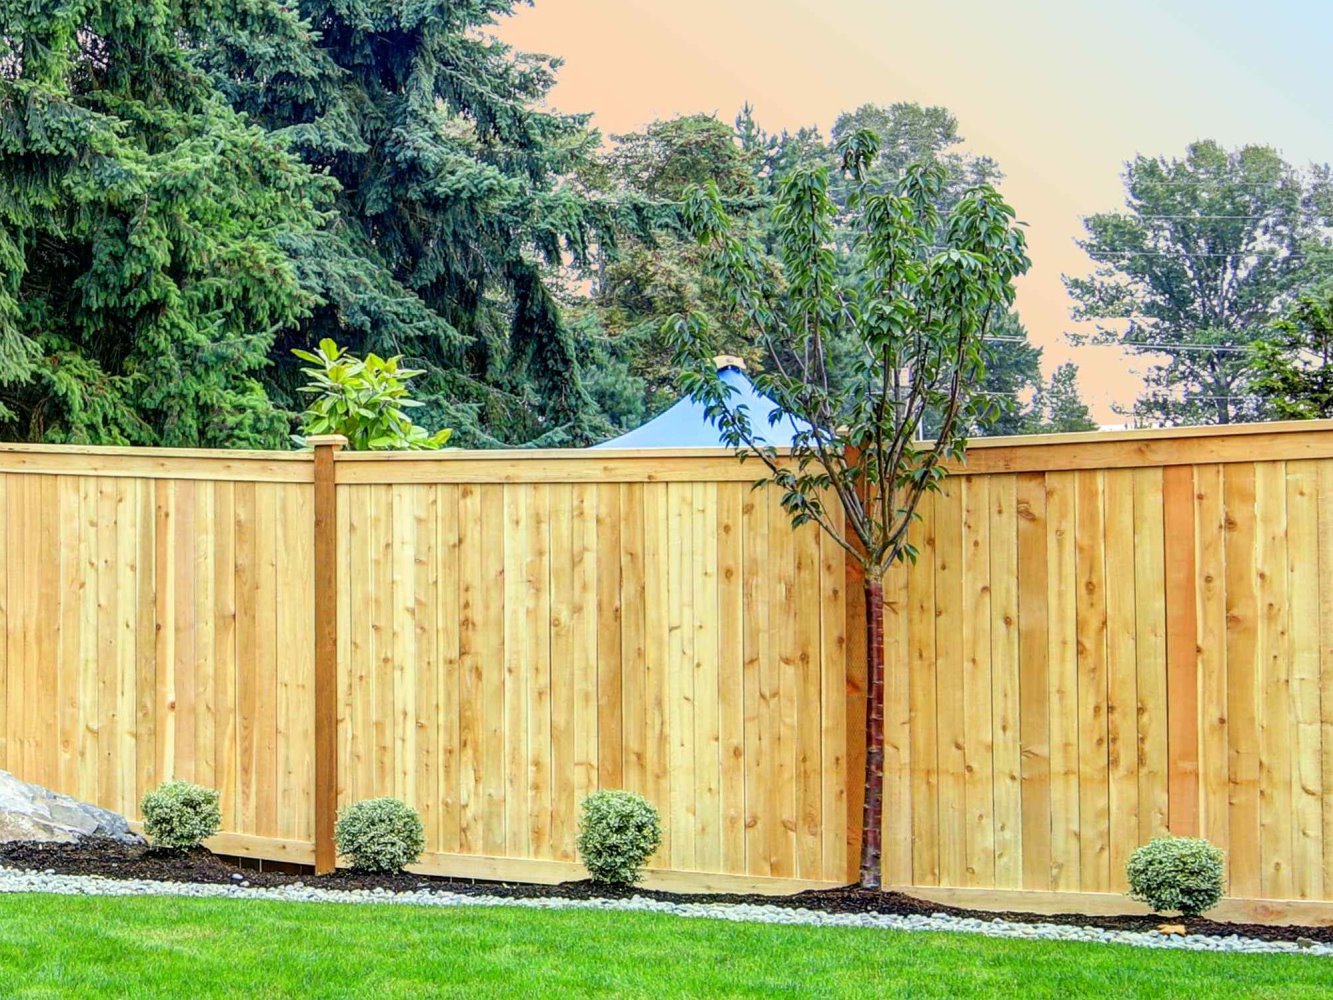 Photo of a wood privacy fence